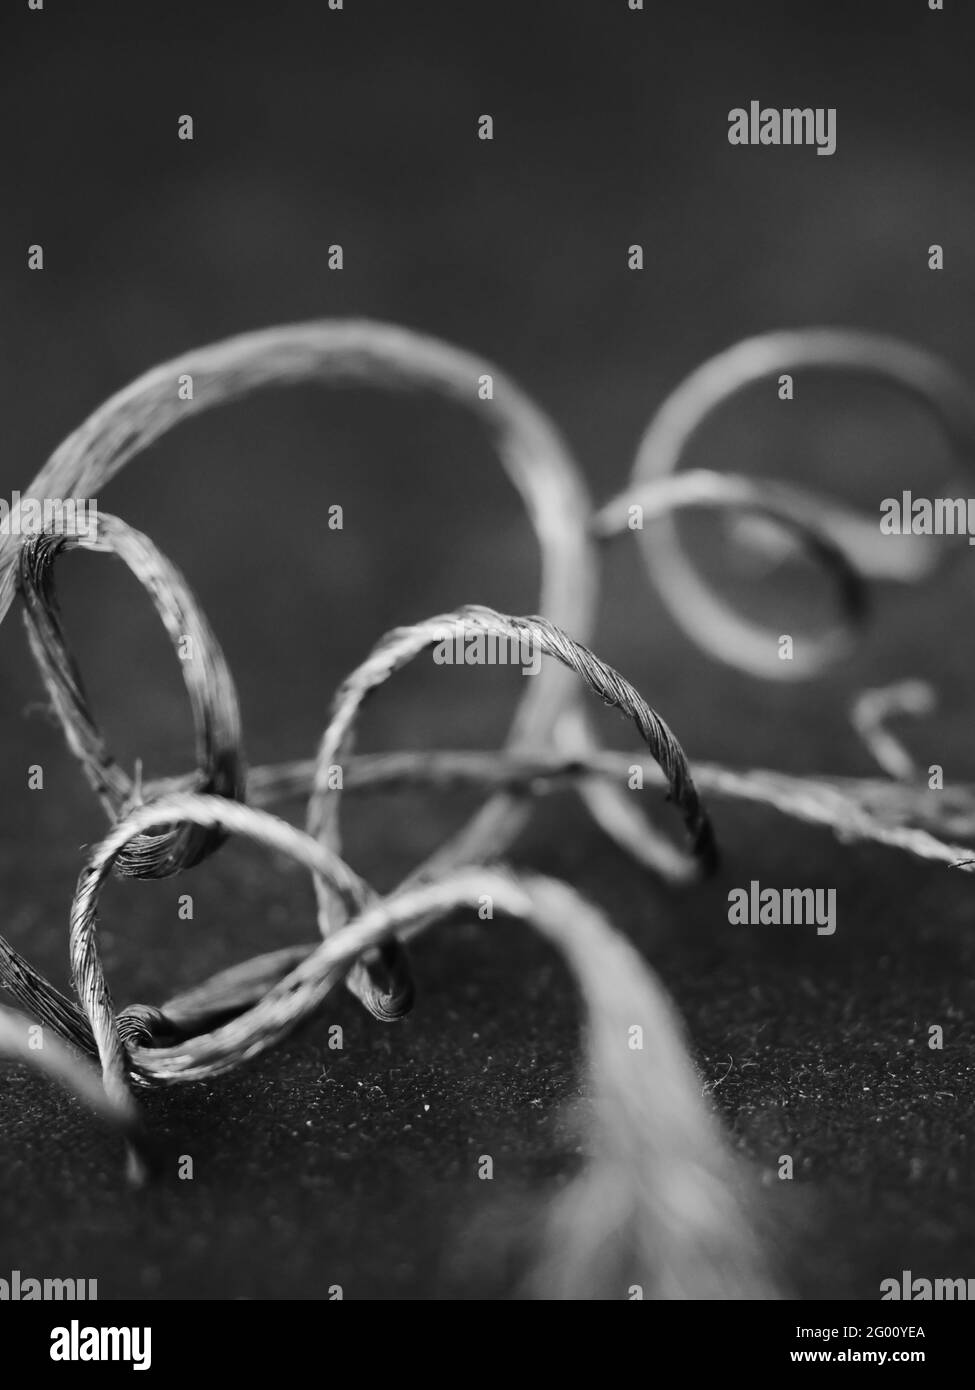 Verticalshot of silver coil wire on a black surface Stock Photo